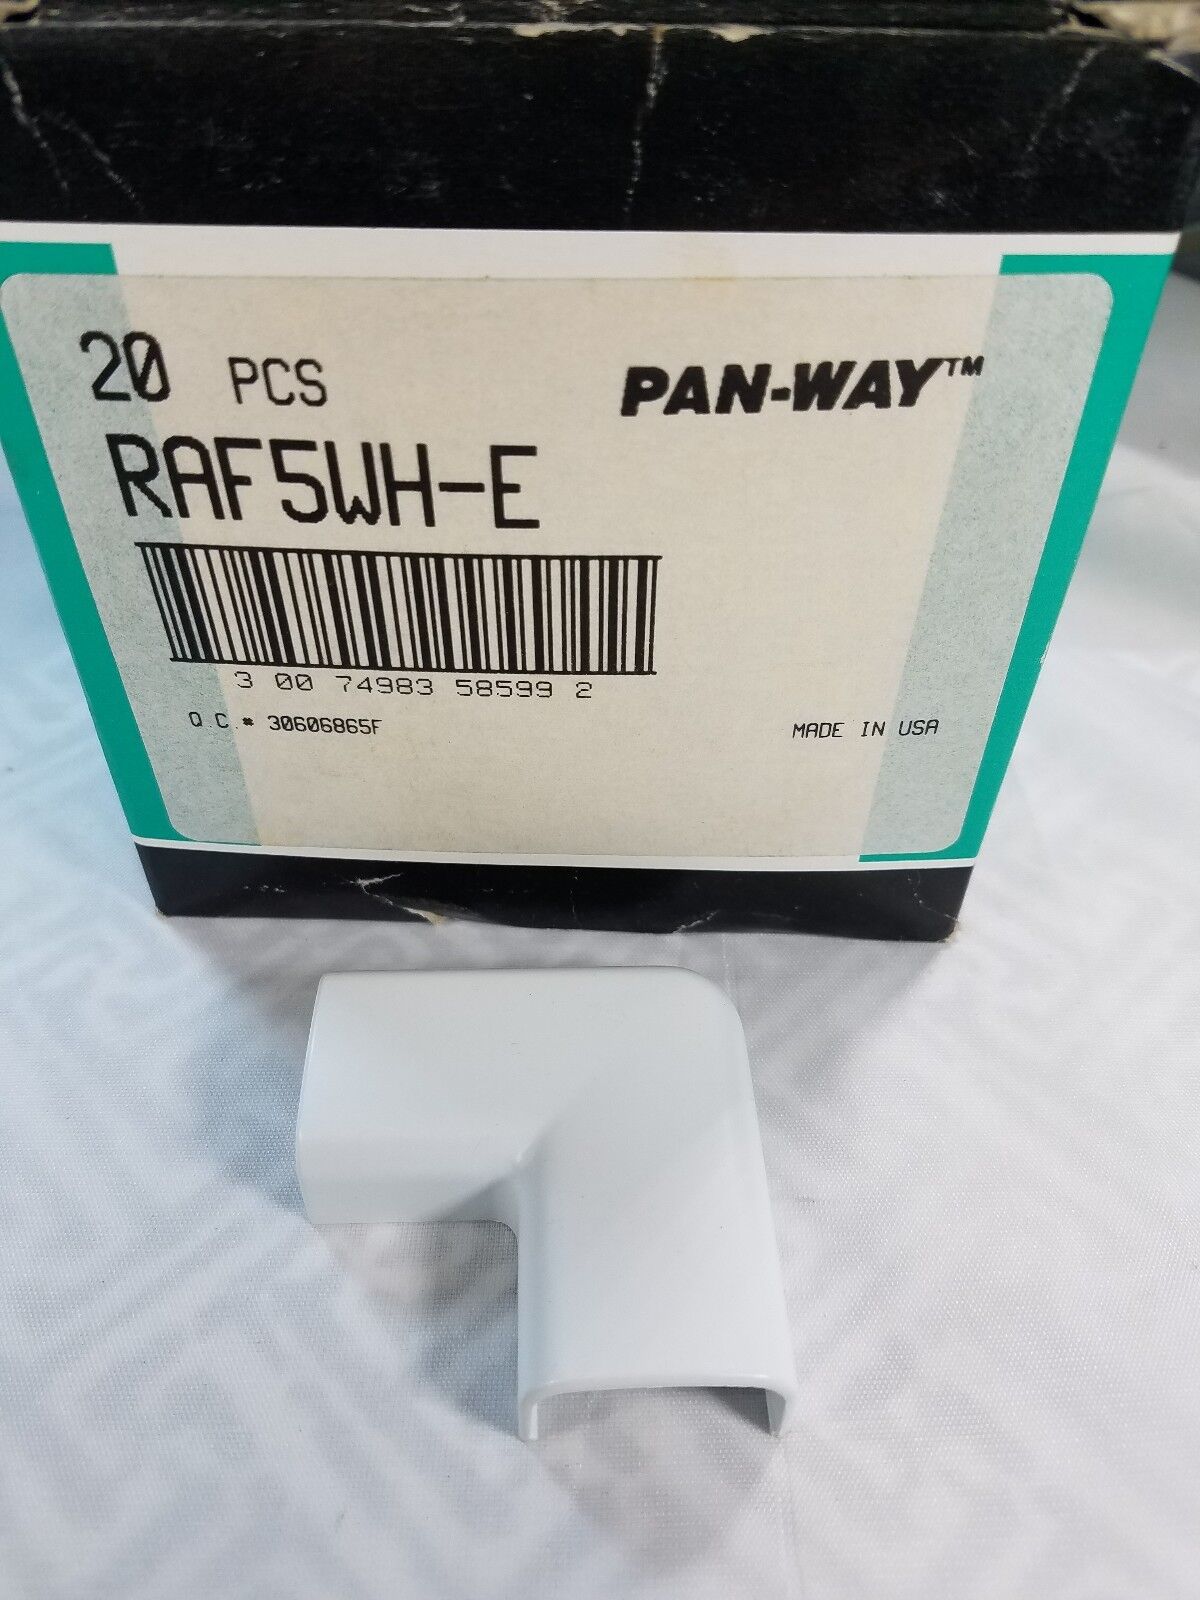 20 (Lot) Panduit RAF5WH-E PanwayType W/LD5 Low Voltage Right Angle Fitting 